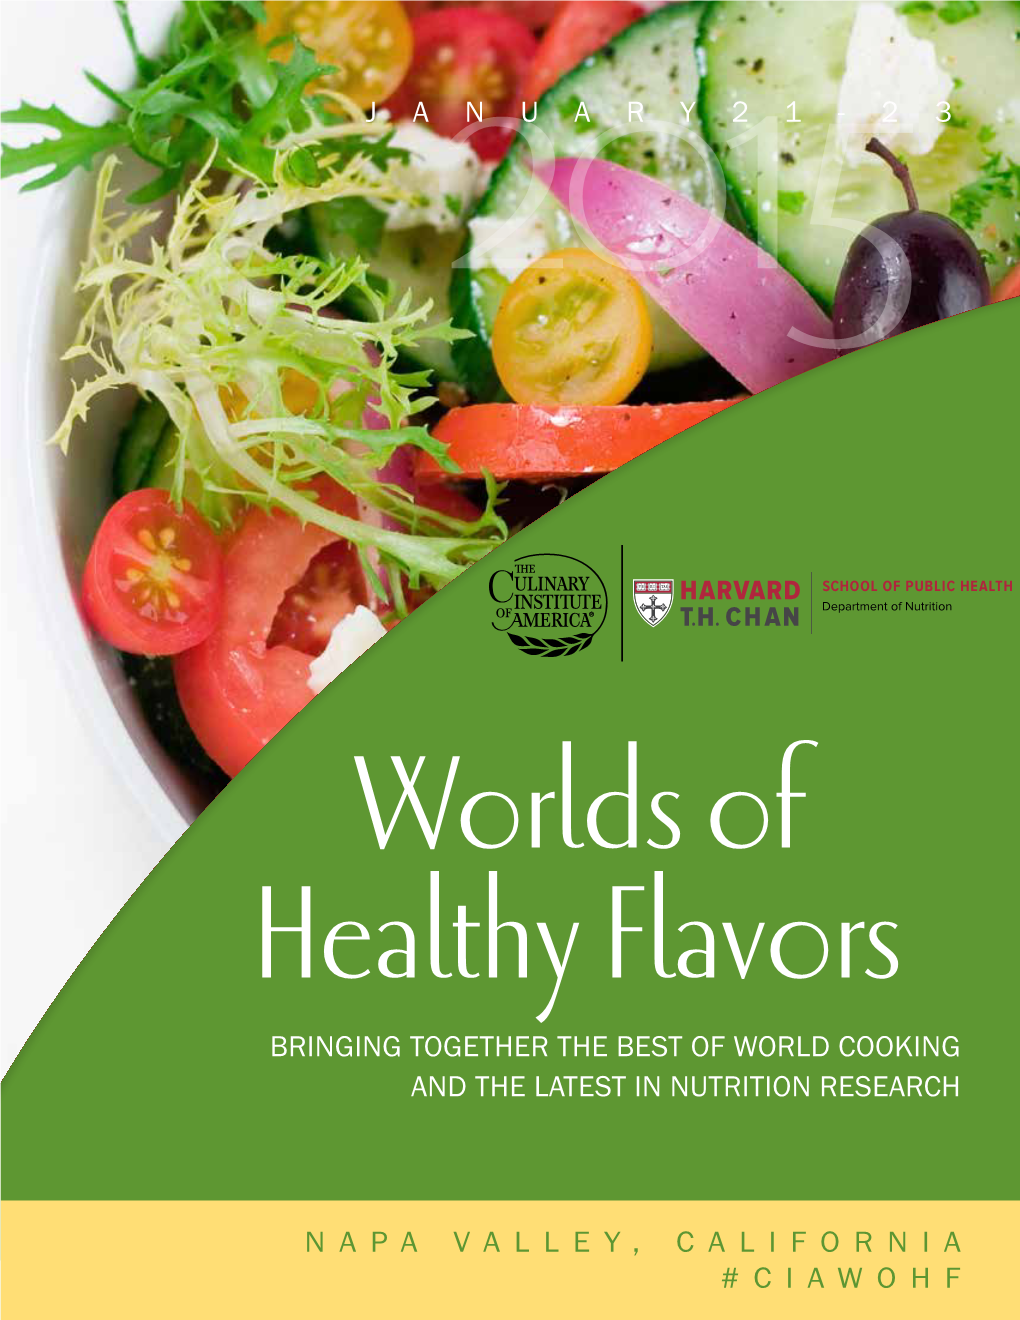 Bringing Together the Best of World Cooking and the Latest in Nutrition Research